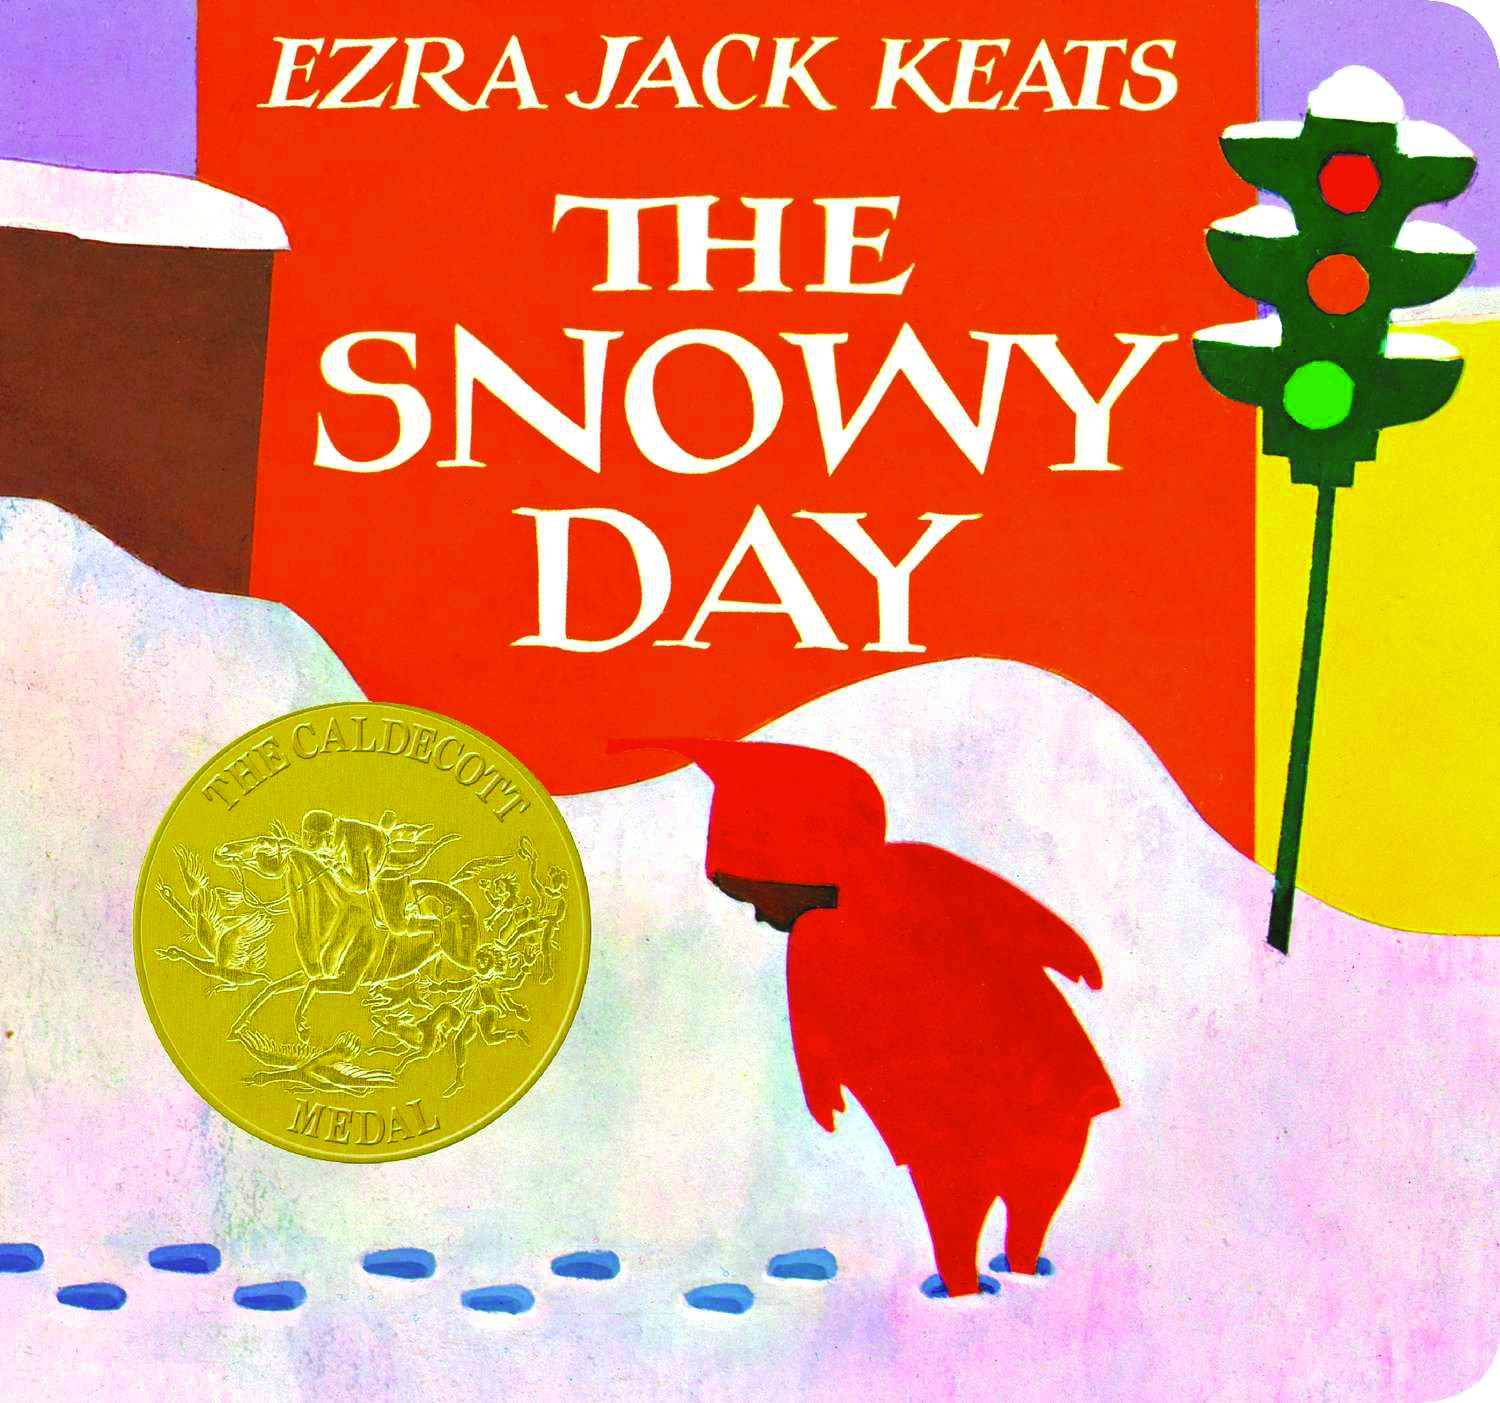 1. The Snowy Day